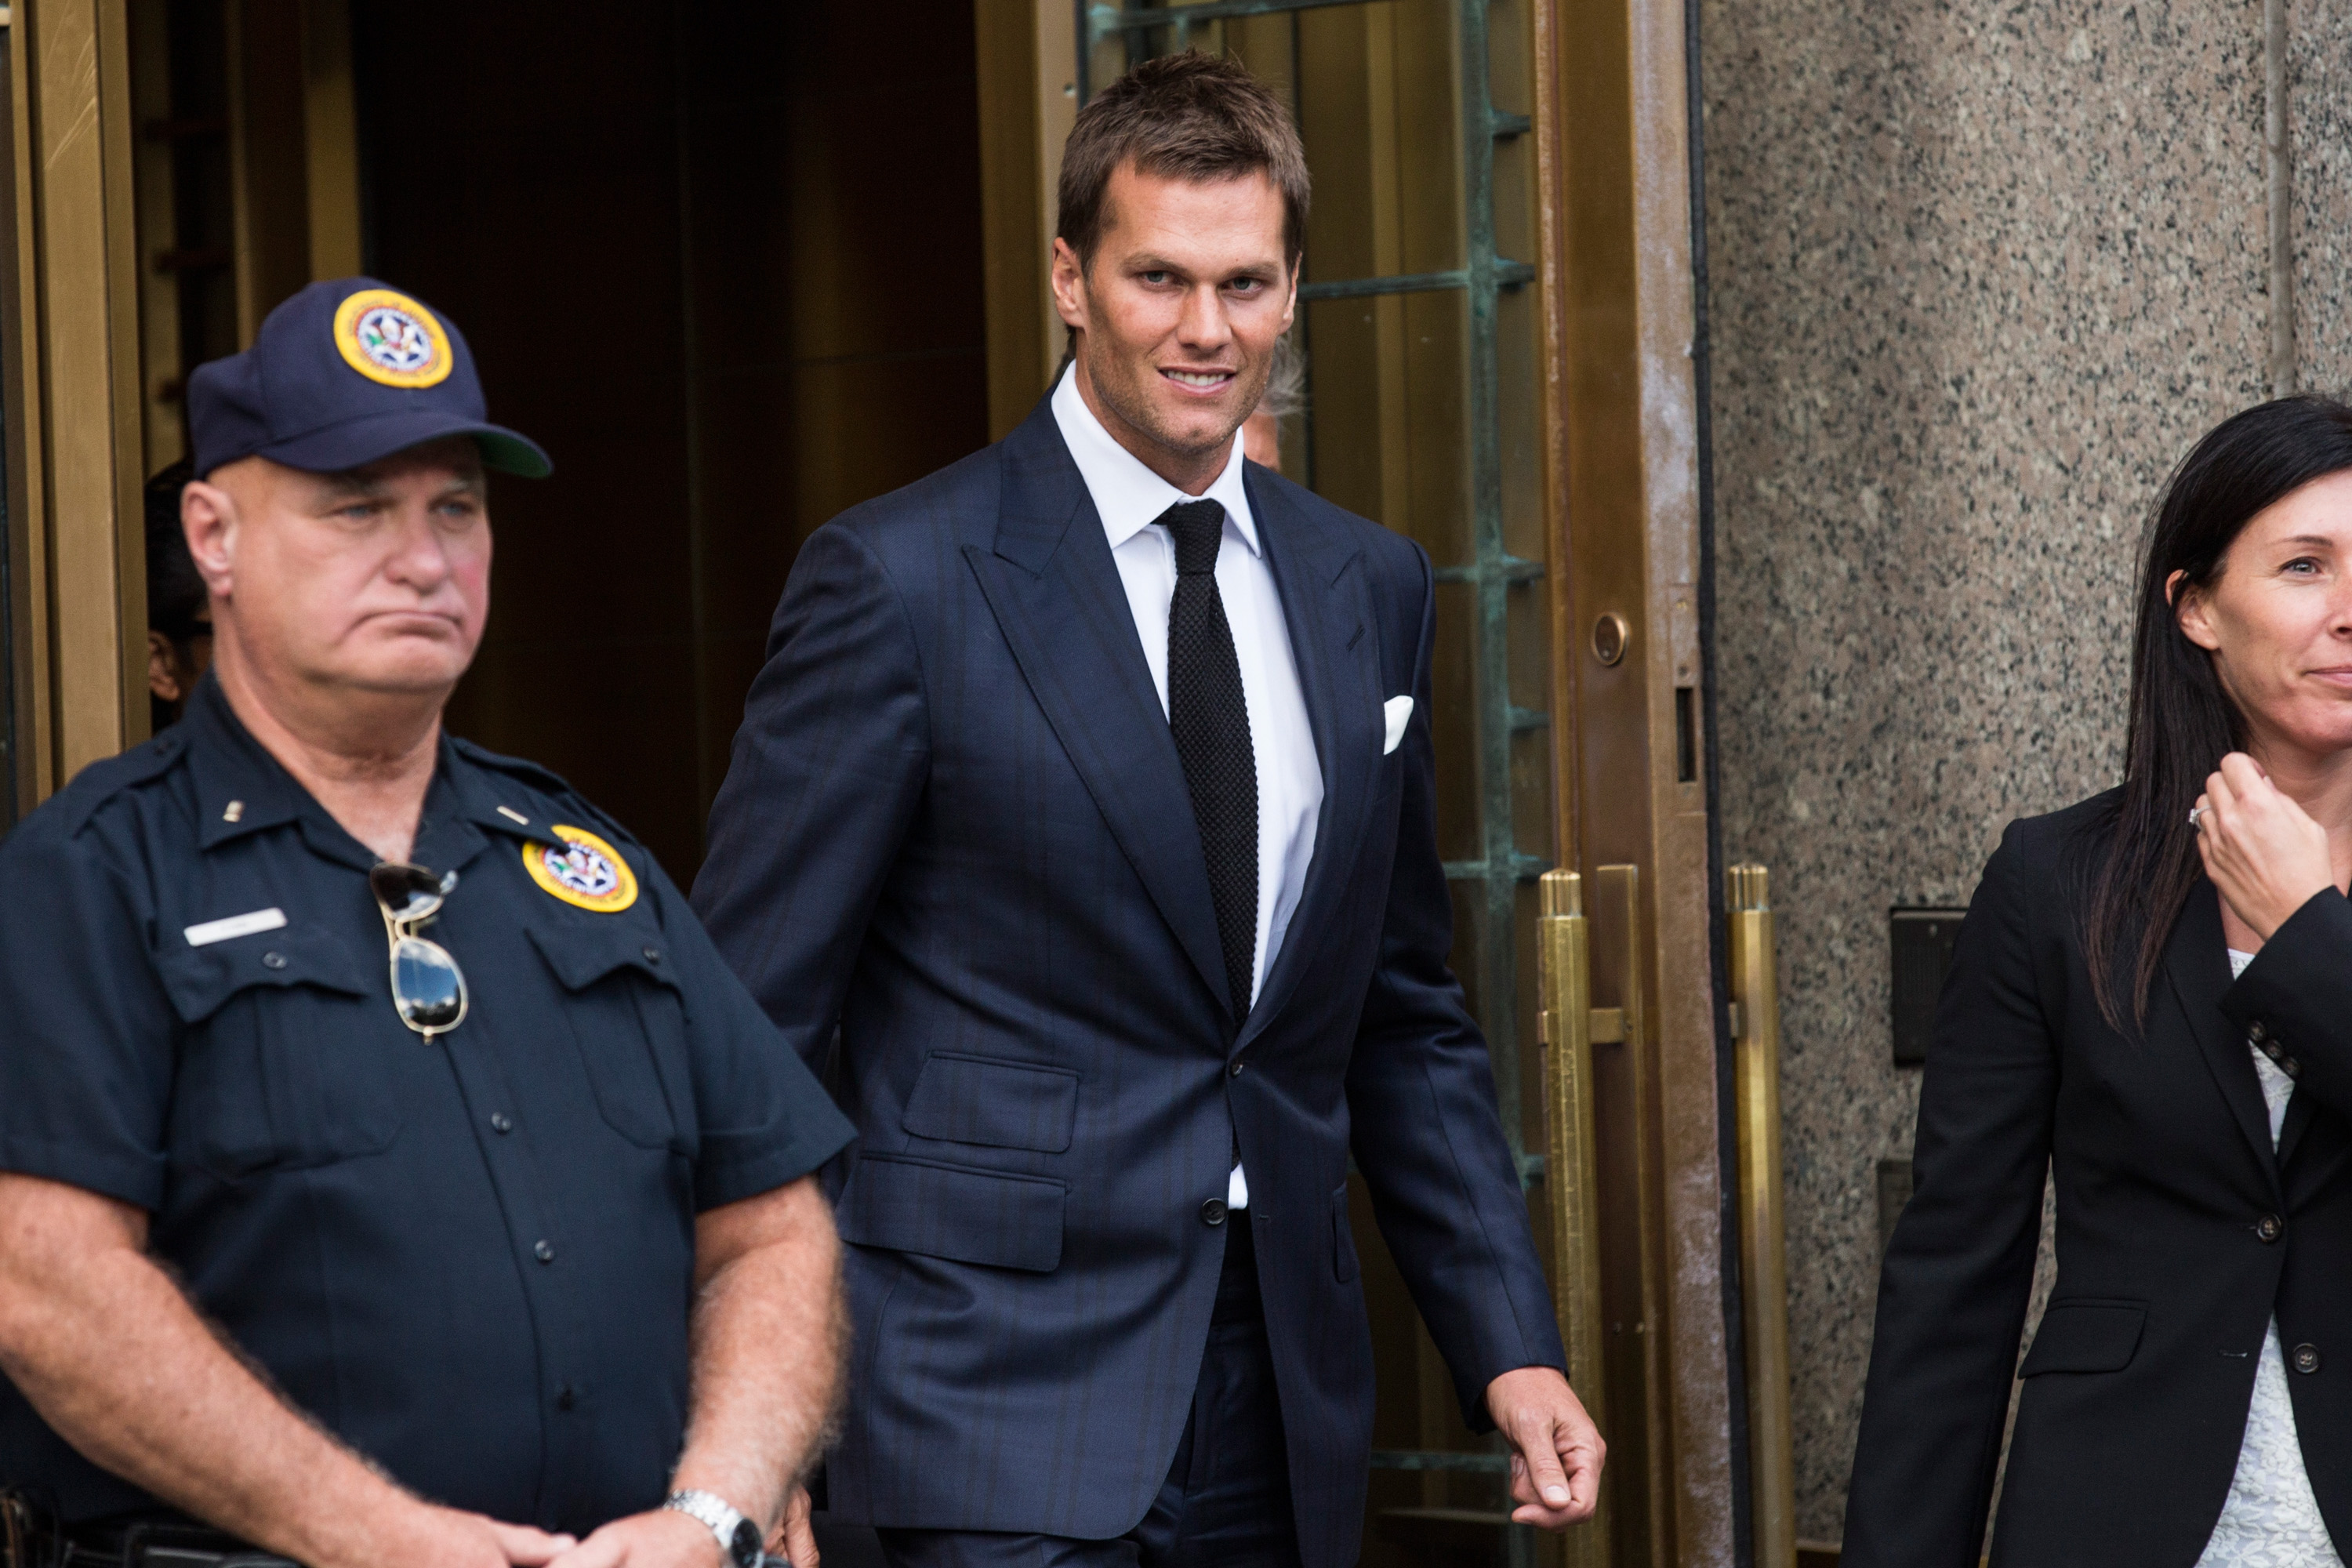 NEW YORK, NY - AUGUST 12: New England Patriots quarterback Tom Brady leaves federal court after appealing the National Football League's (NFL) decision to suspend him for four games of the 2015 season on August 12, 2015 in New York City. The NFL alleges that Brady knew footballs used in one of last season's games was deflated below league standards, making it easier to handle. (Photo by Andrew Burton/Getty Images)